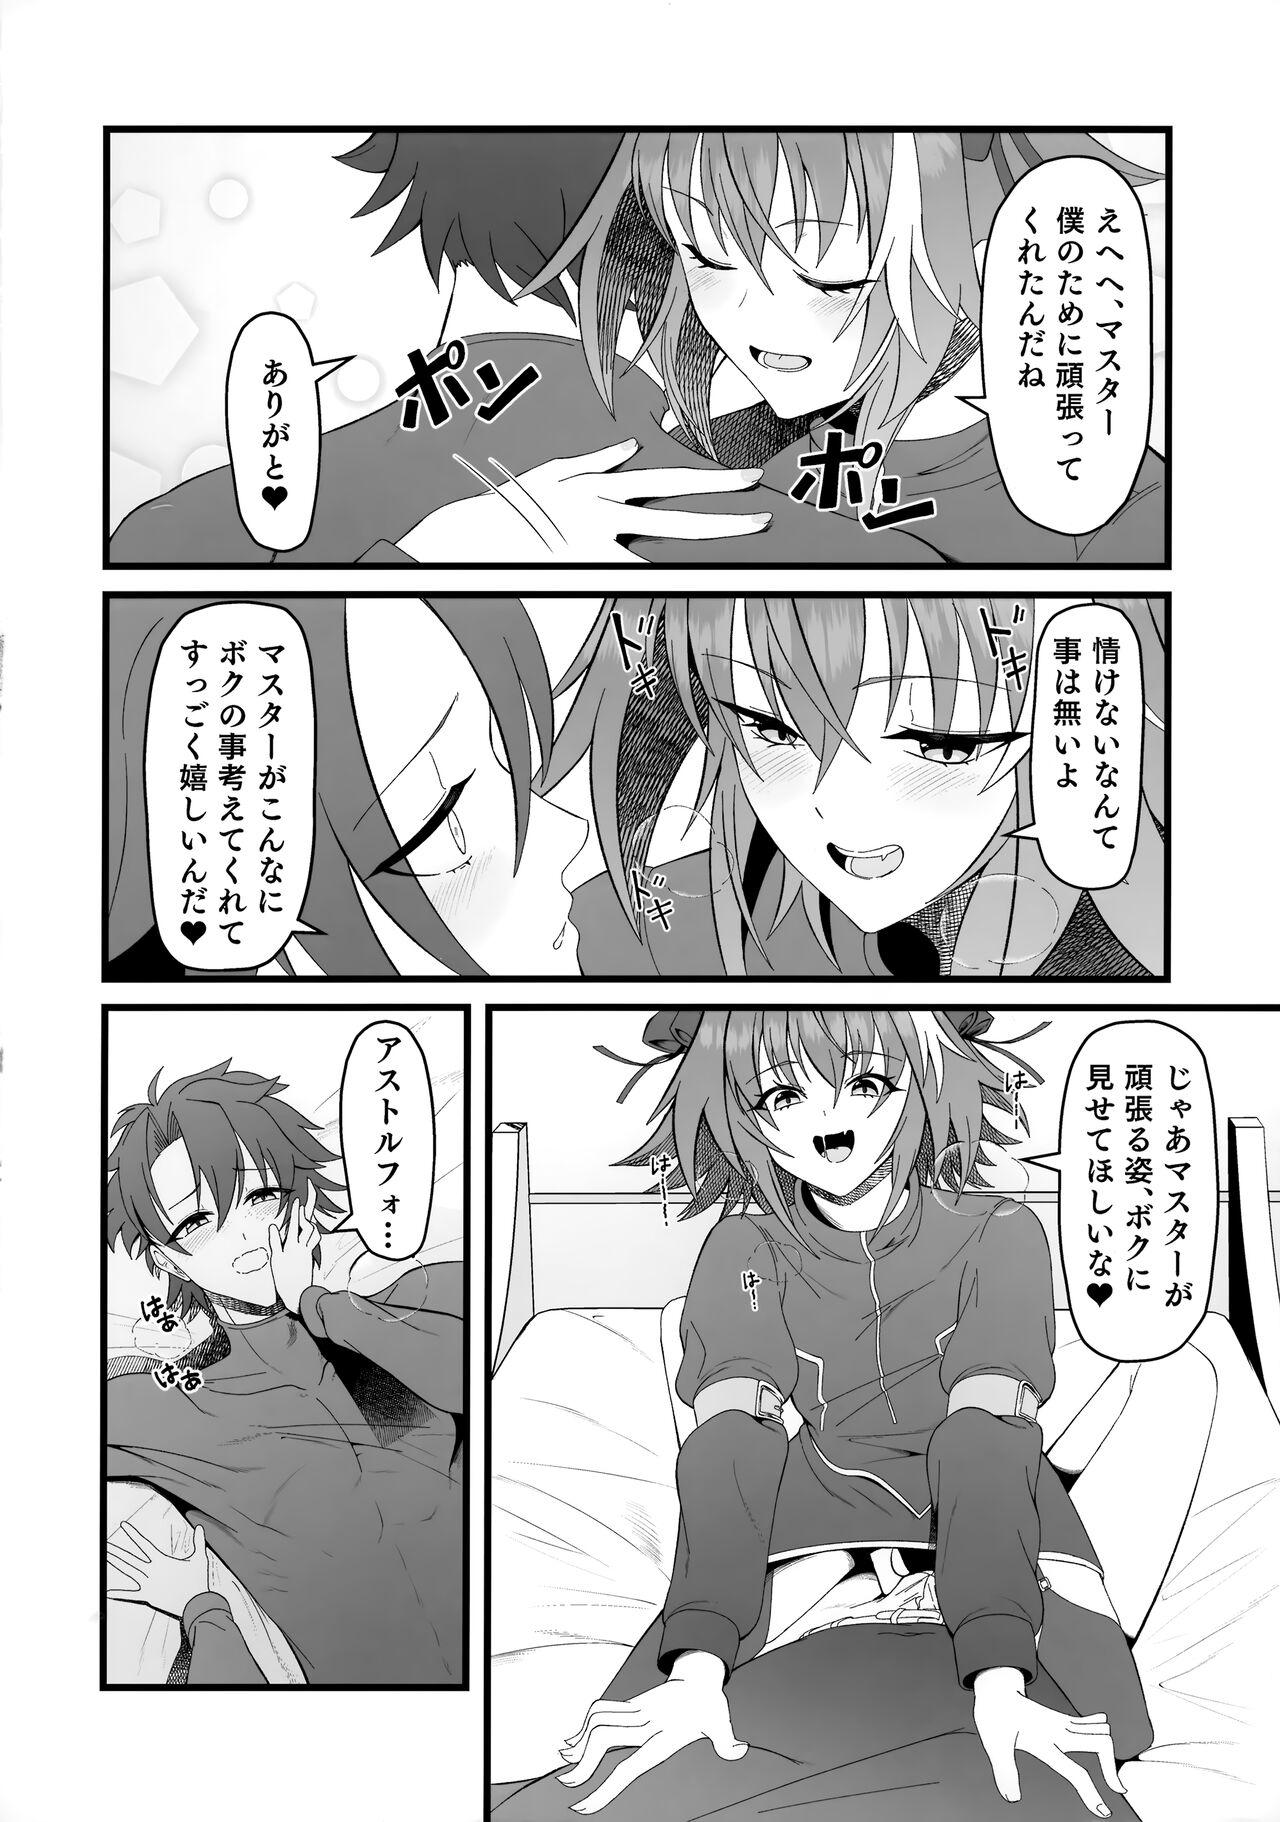 Cousin Kimi no Ichiban ni Naritakute - I wanted to be your number one. - Fate grand order Spank - Page 9